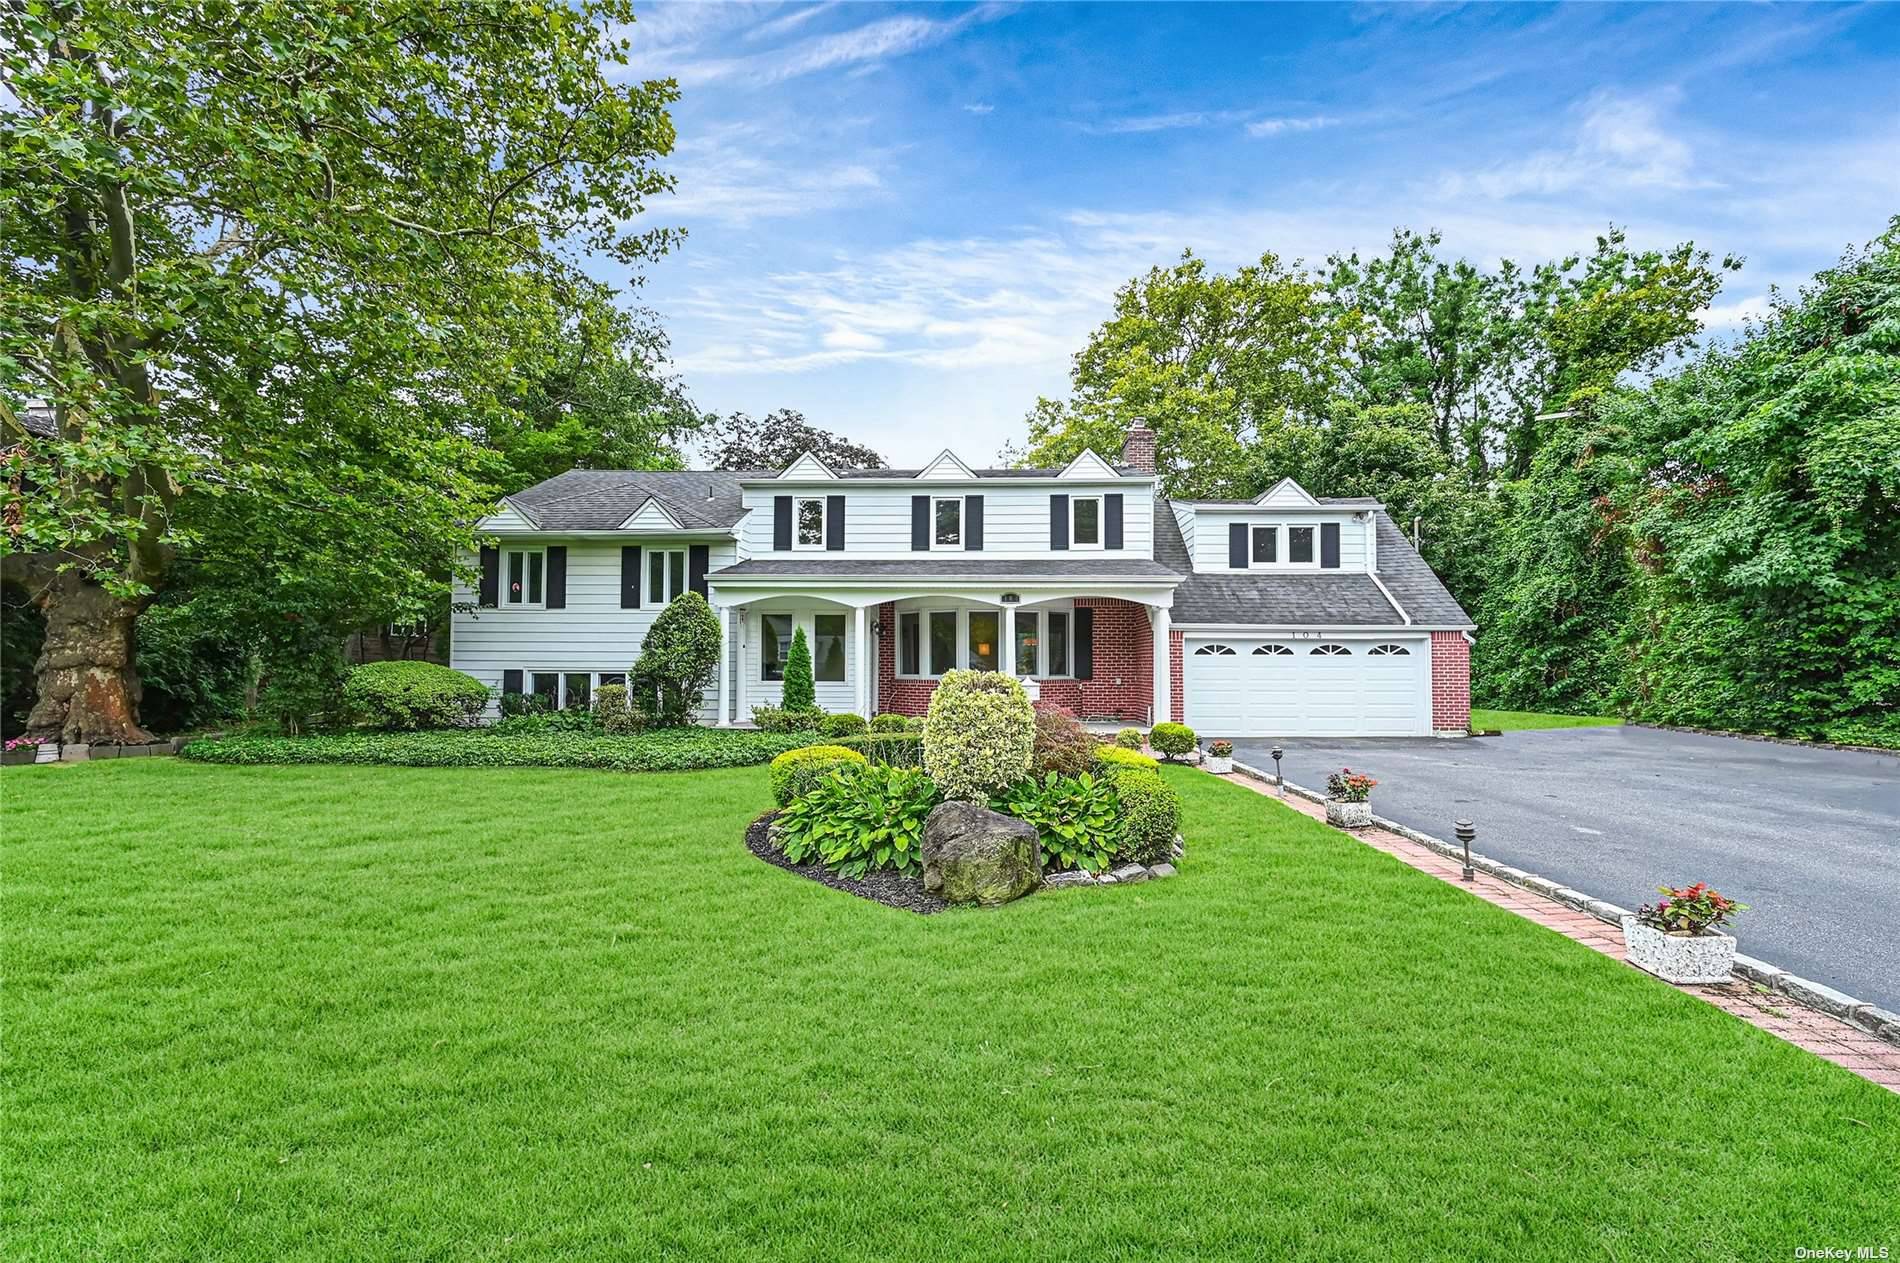 Welcome to this beautiful 5 bedroom, 4 full bath, 2 half bath home in Manhasset !